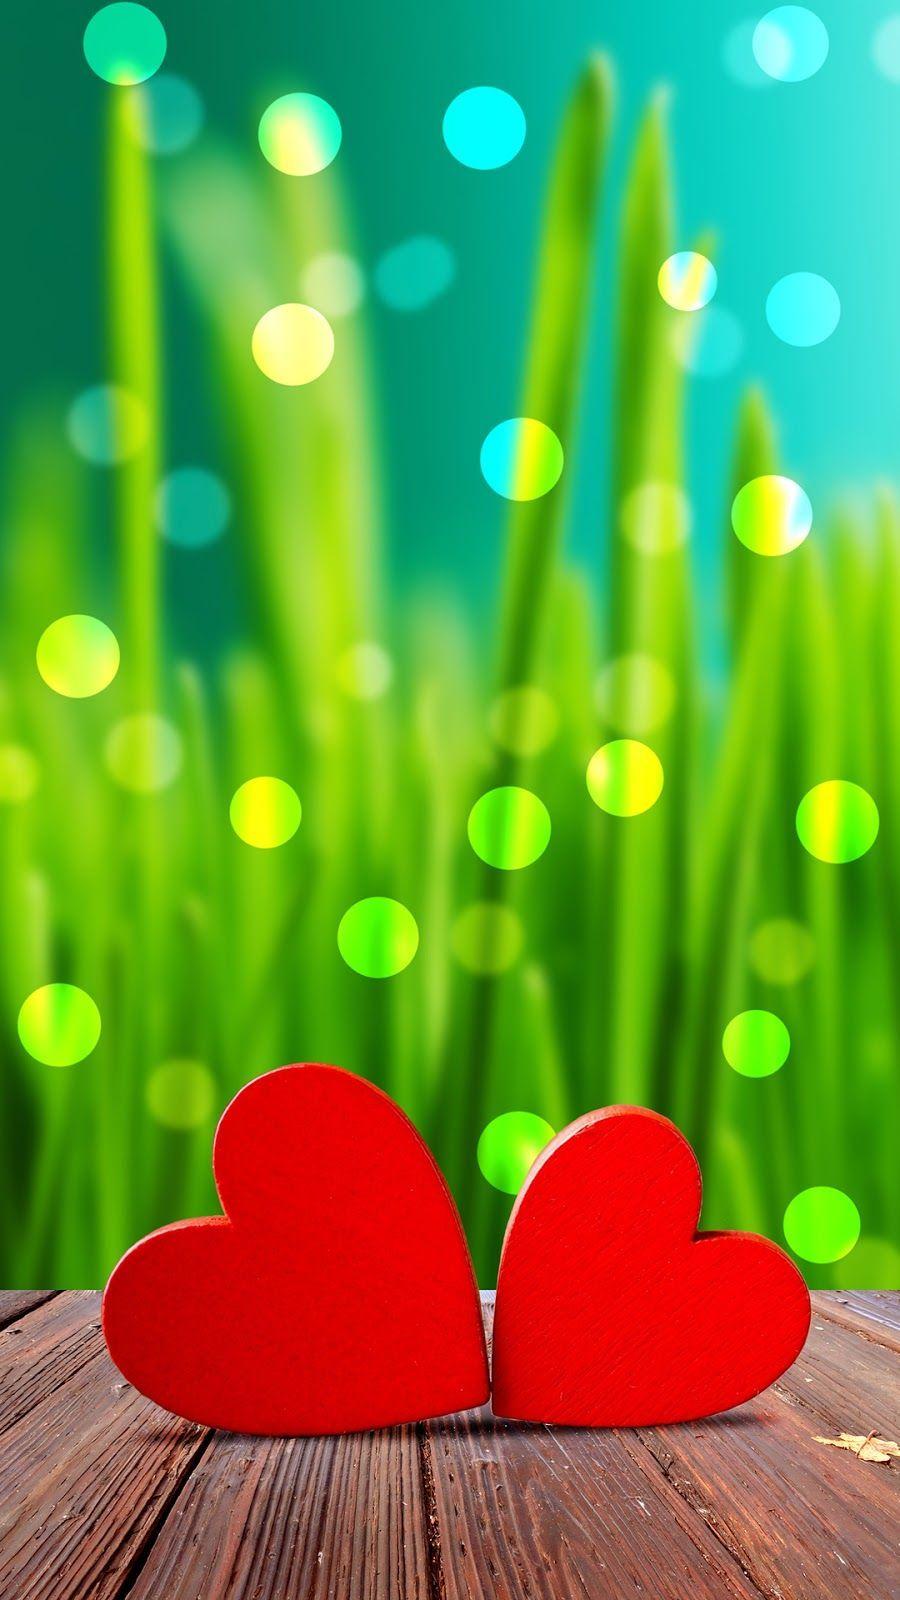 Iphone Love Wallpapers